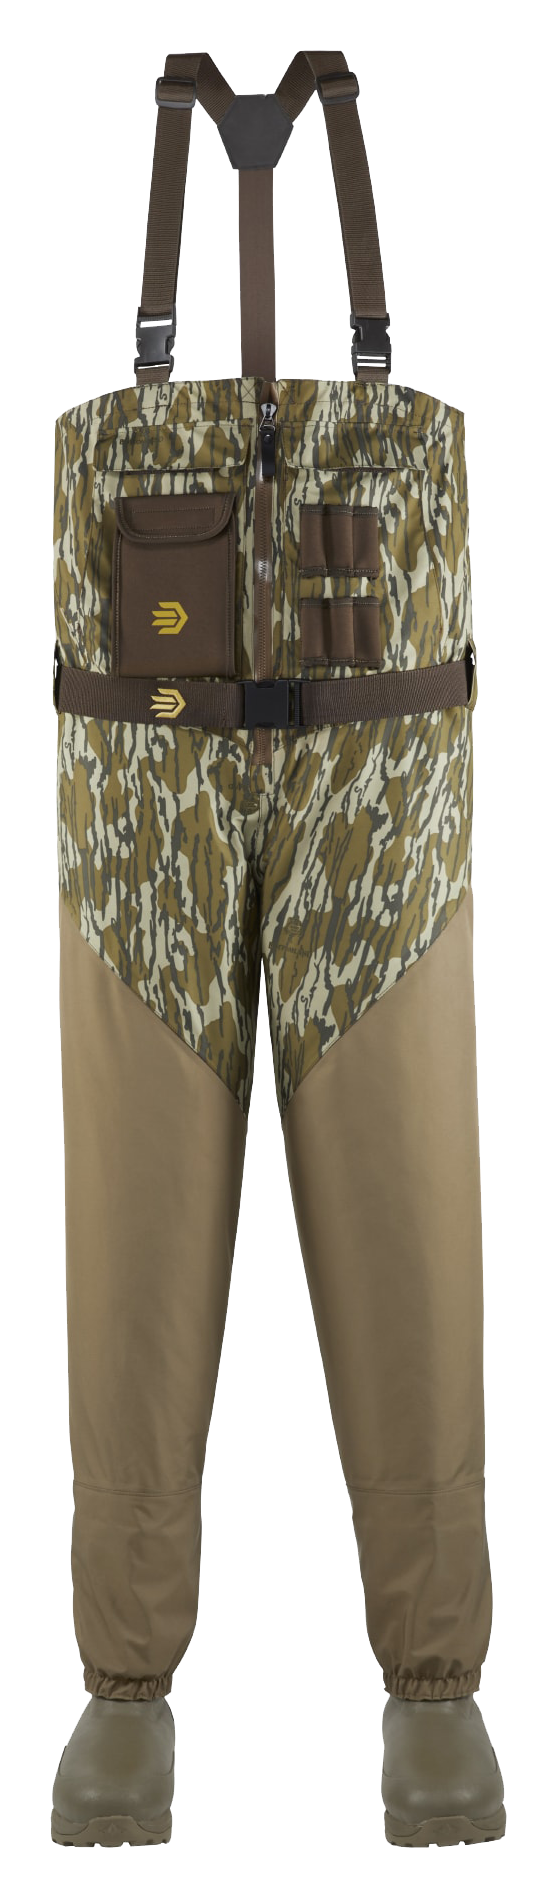 LaCrosse Alpha Agility Select Insulated Front-Zip Breathable Hunting Waders for Men - Mossy Oak Original Bottomland - 9/Stout